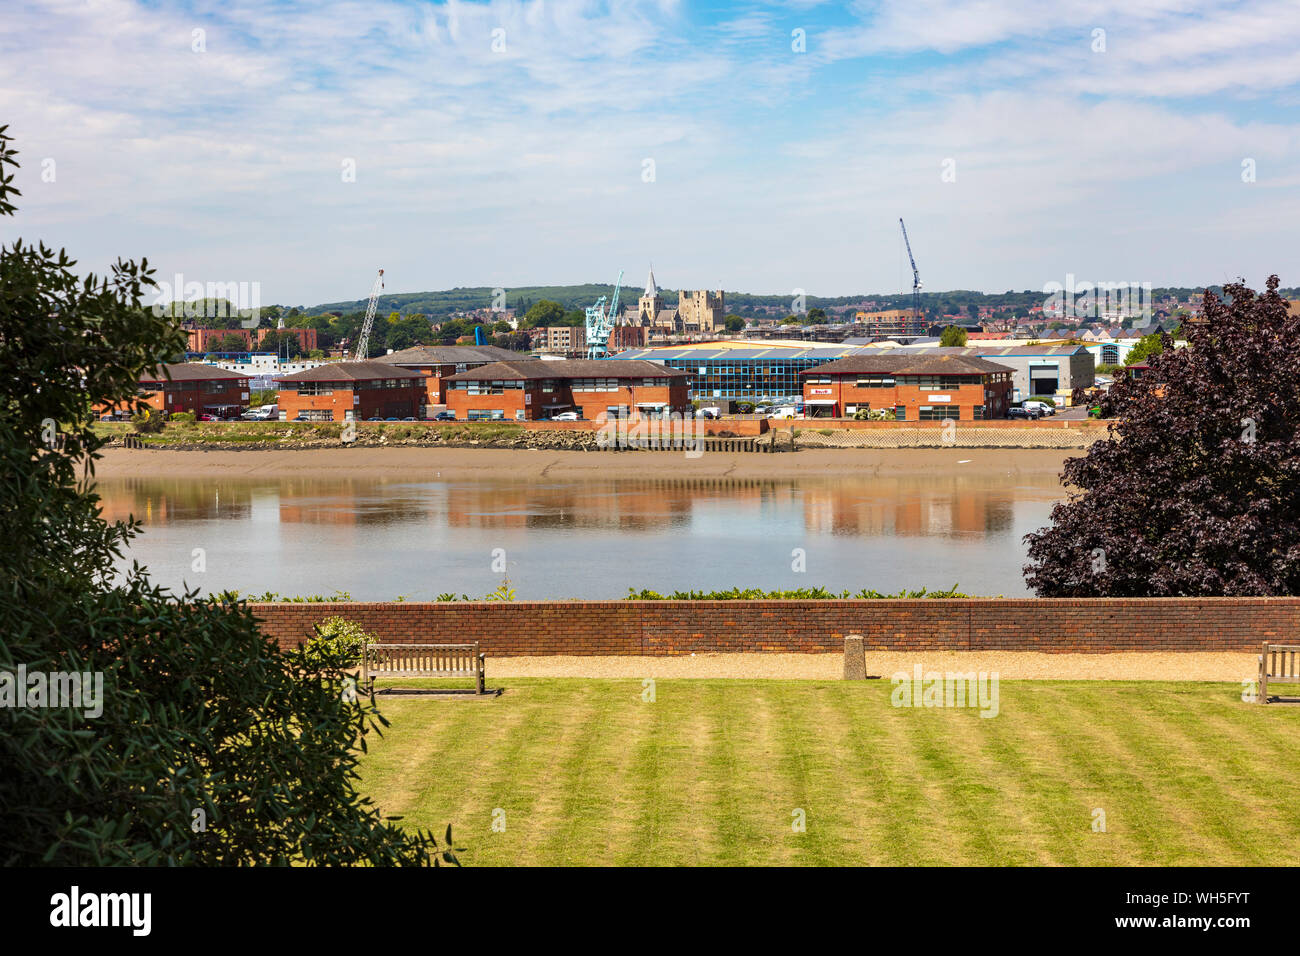 A View across the River Medway towards Rochester Castle and Cathedral, the Medway City Estate in between, Gillingham, Kent, UK Stock Photo